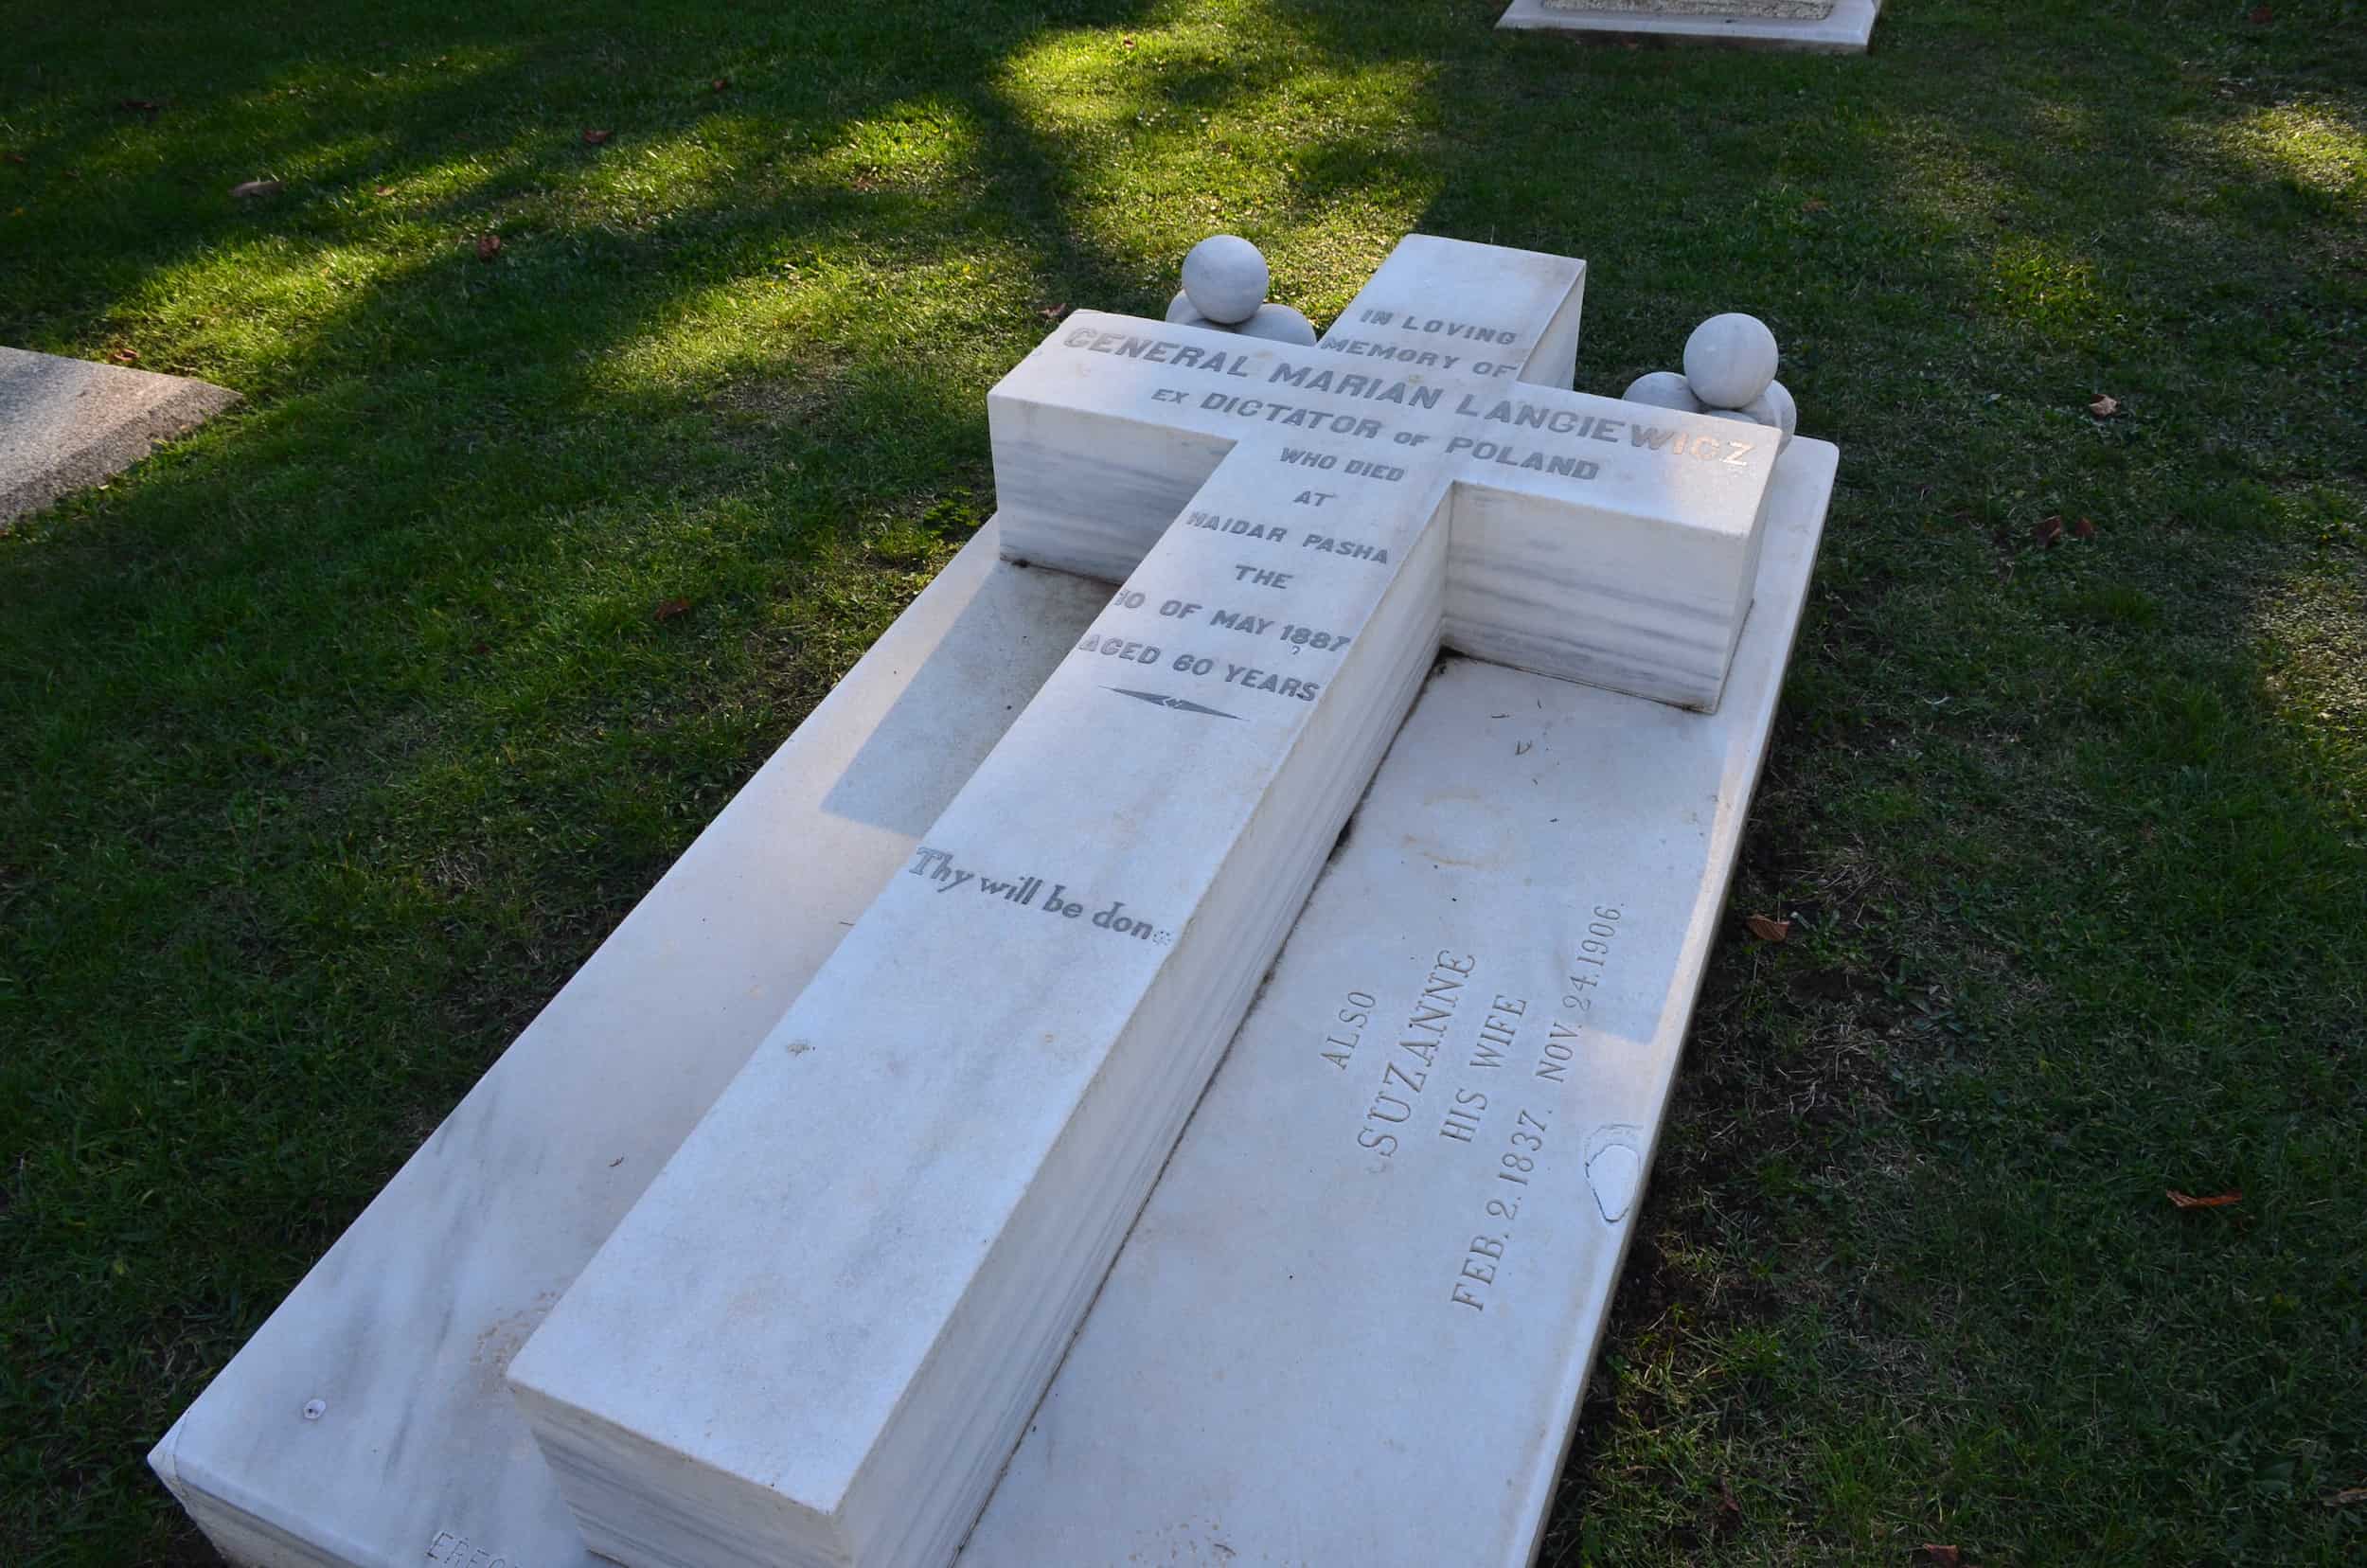 Grave of Marian Langiewicz at the Haidar Pasha Cemetery in Istanbul, Turkey